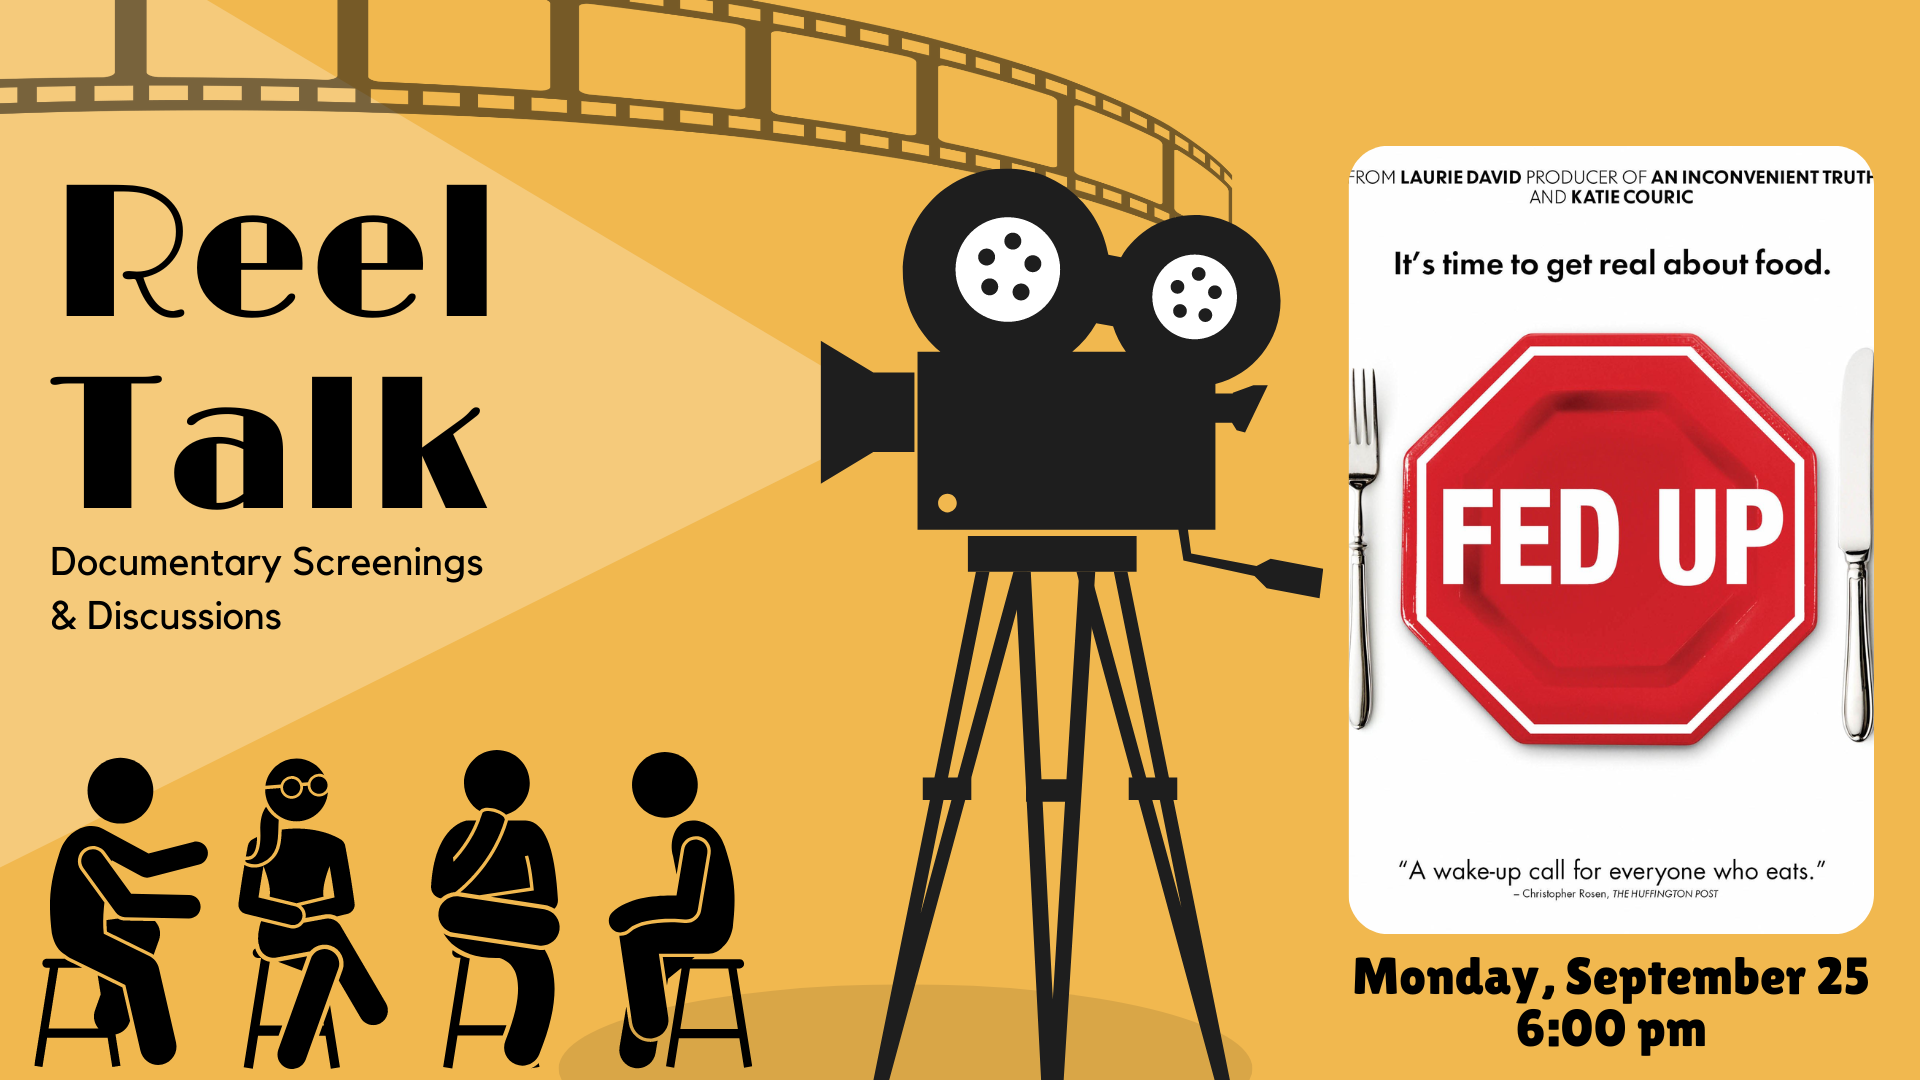 An old timey film projector casts a light on the name of the program, "Reel Talk: documentary screenings & discussion".  A reel of film appears in the background.  A group of 4 figures sit in chairs, as if in discussion, under the text.  The movie poster is to the right of the projector.